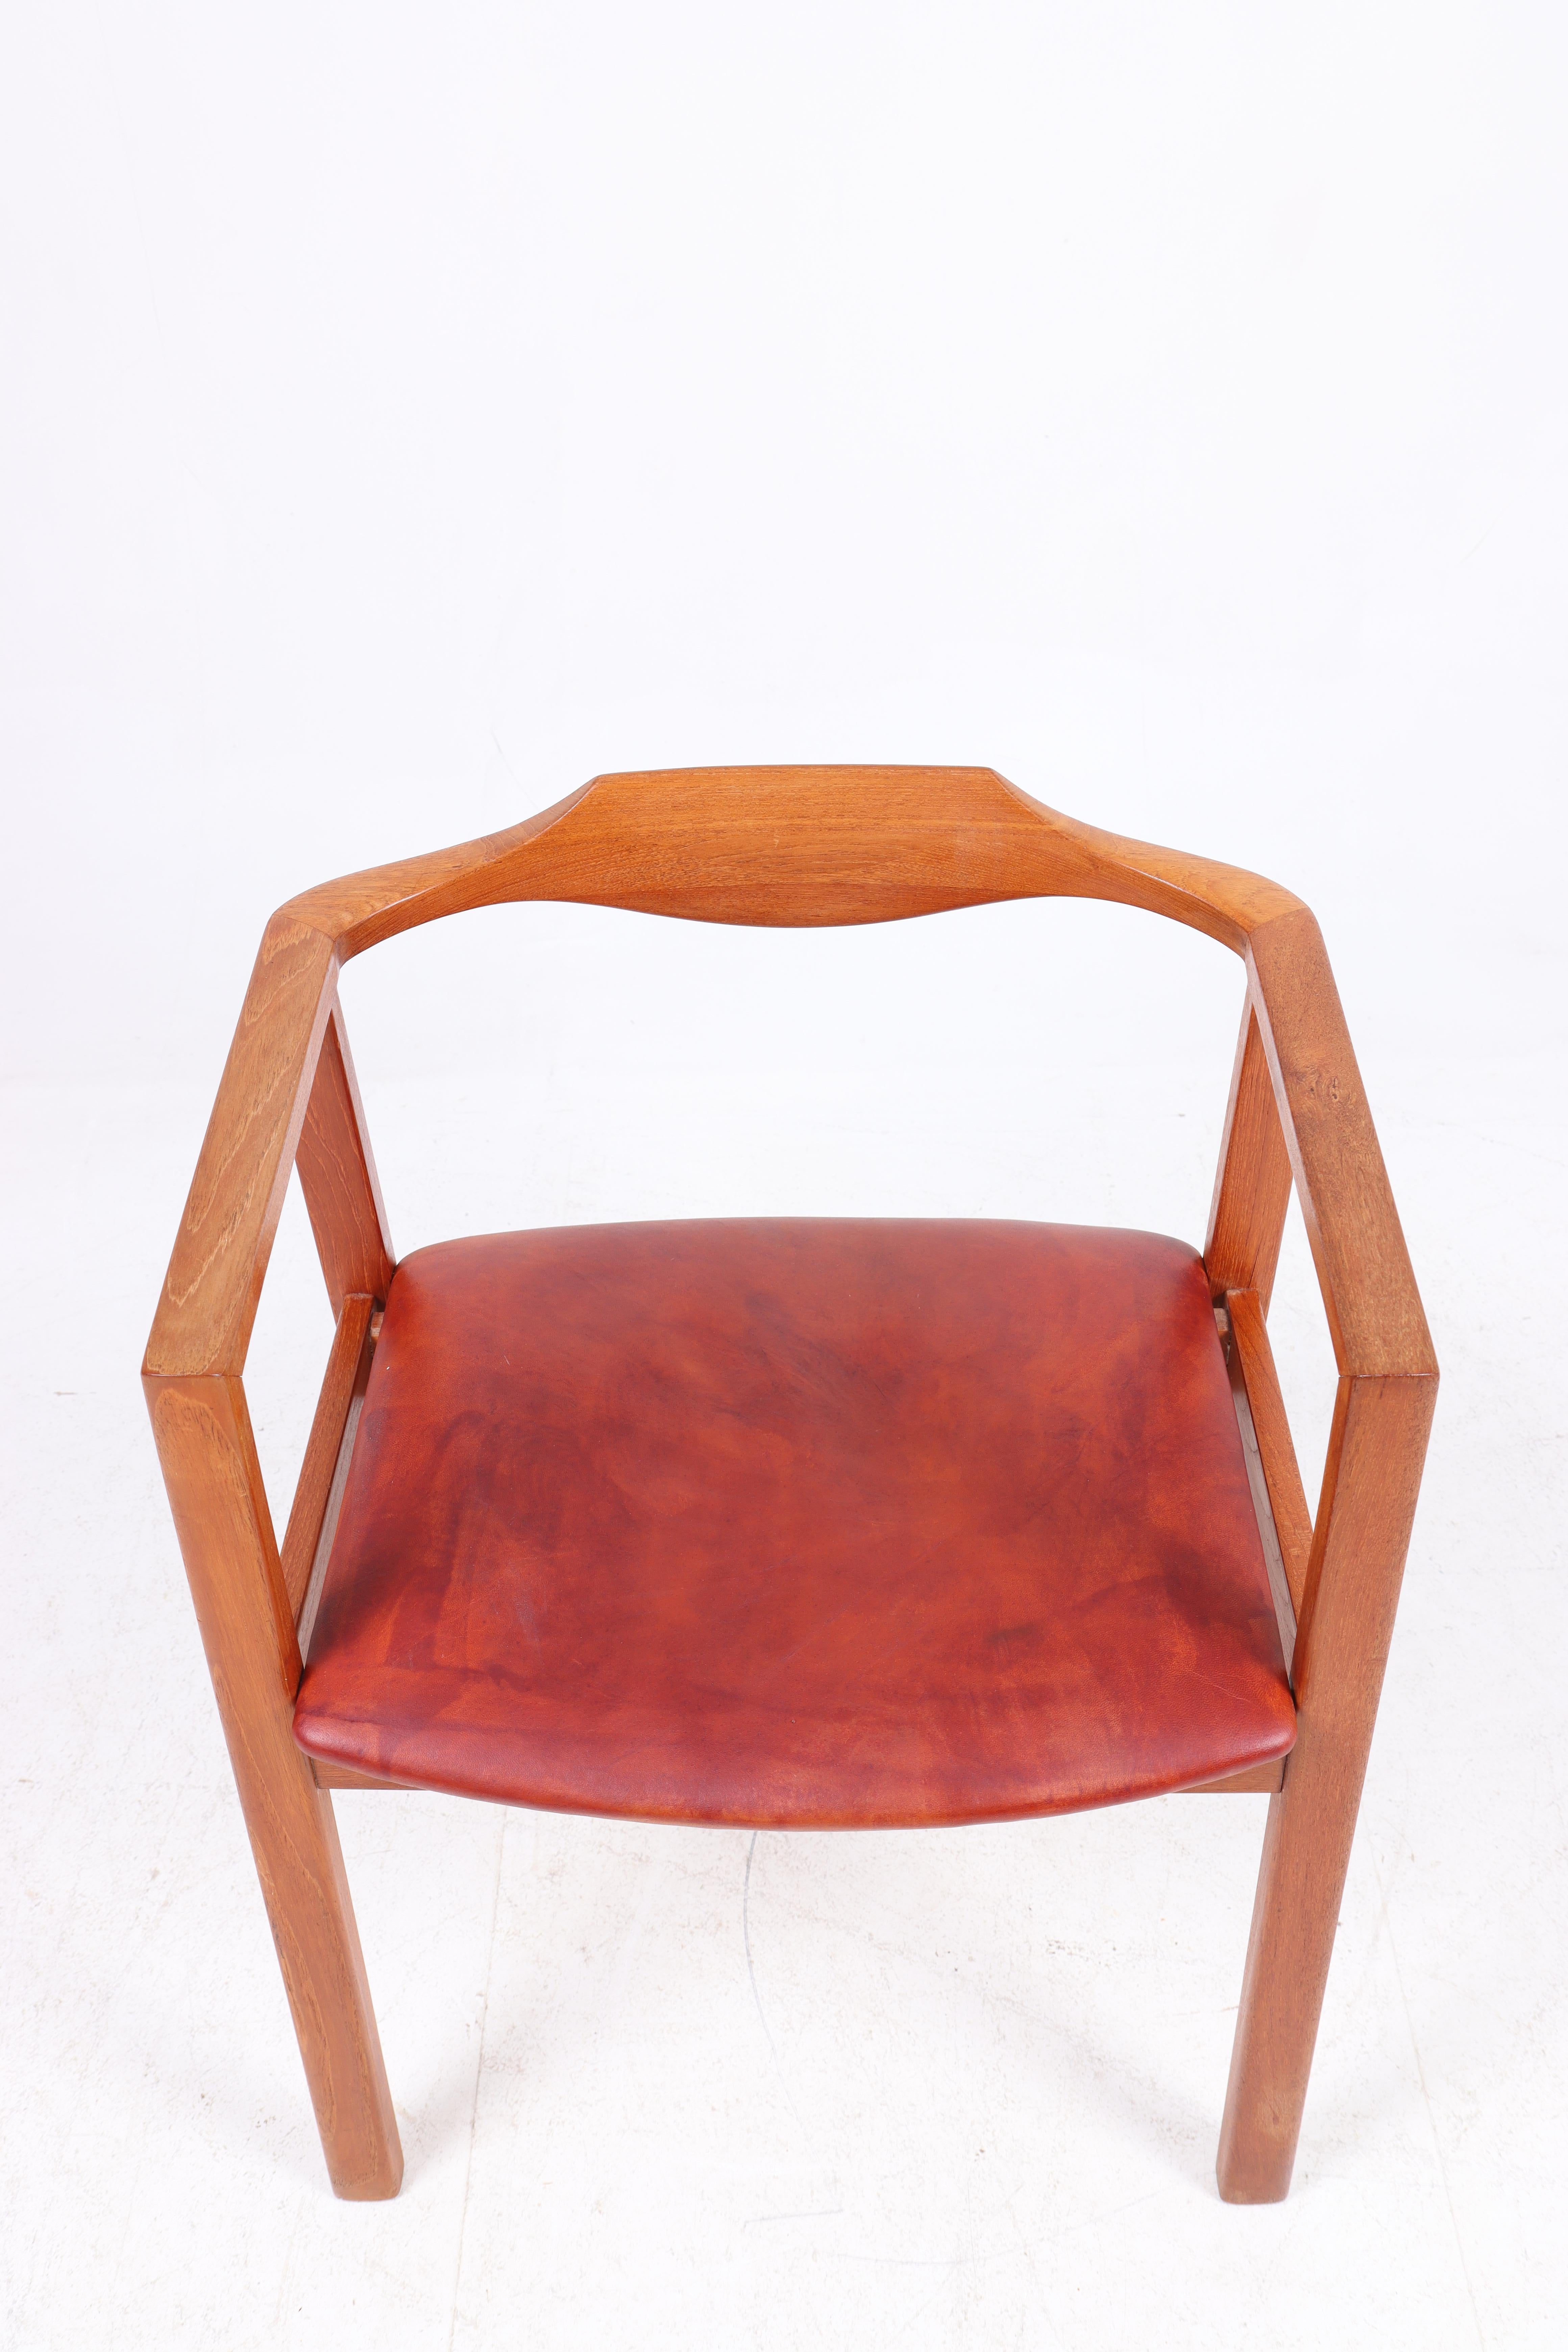 Mid-20th Century Midcentury Armchair in Teak and Patinated Leather, 1950s For Sale